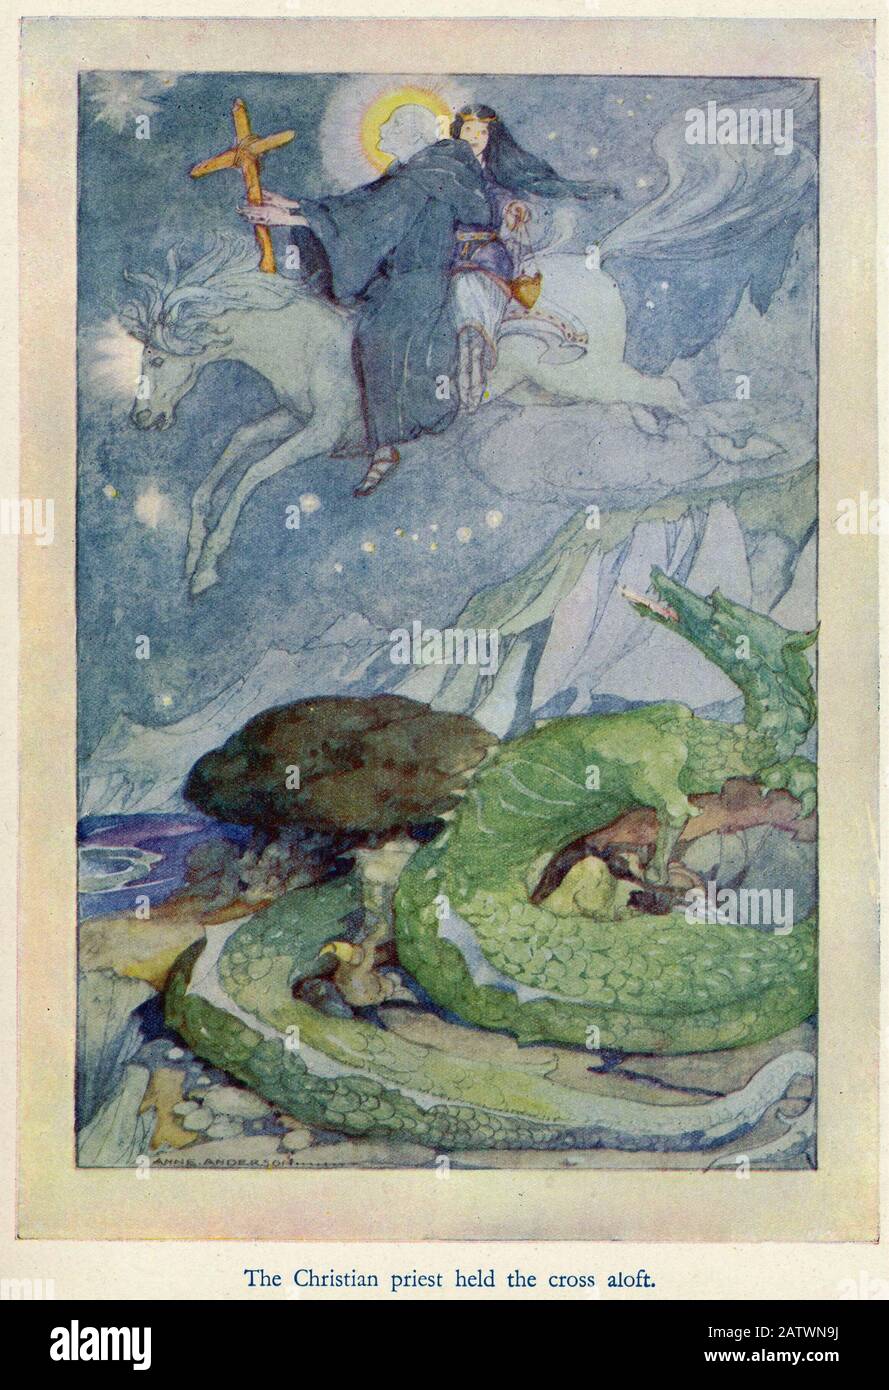 Andersen s fairy stories - page 96a  - 1924 - Illustration by Anne Anderson (1874 - 1930) Stock Photo